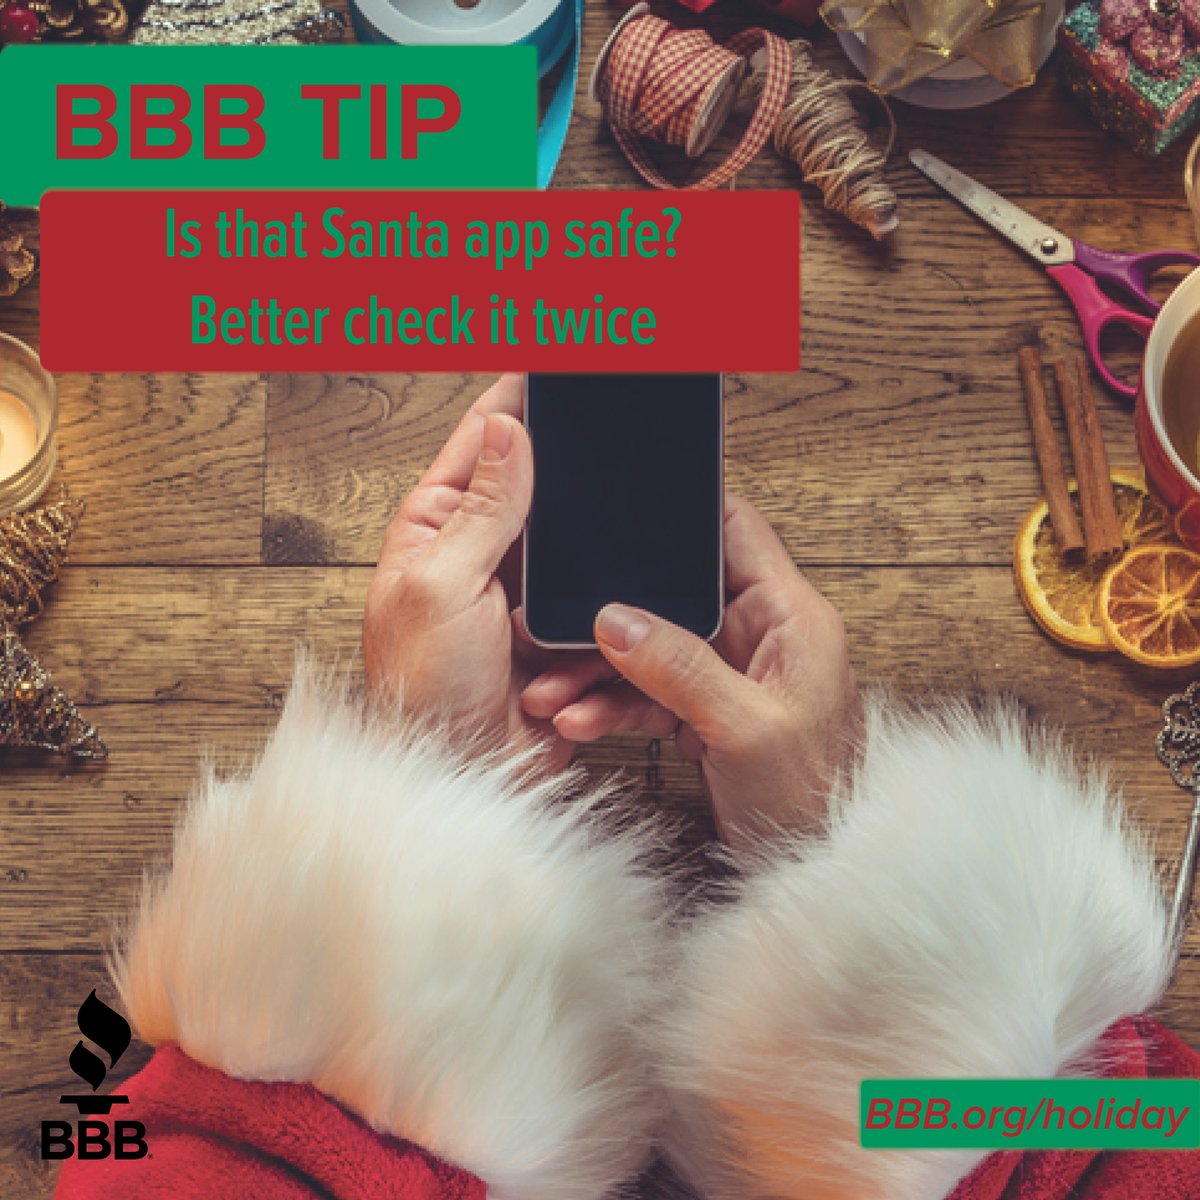 With holiday-themed apps, children can video chat live with Santa himself, track his sleigh on Christmas Eve, or relay their Christmas wish-lists. 

Before downloading, here are some tips to keep your information safe! ow.ly/3SP250H7sOE

#BBBUpstateSc #HolidayApps